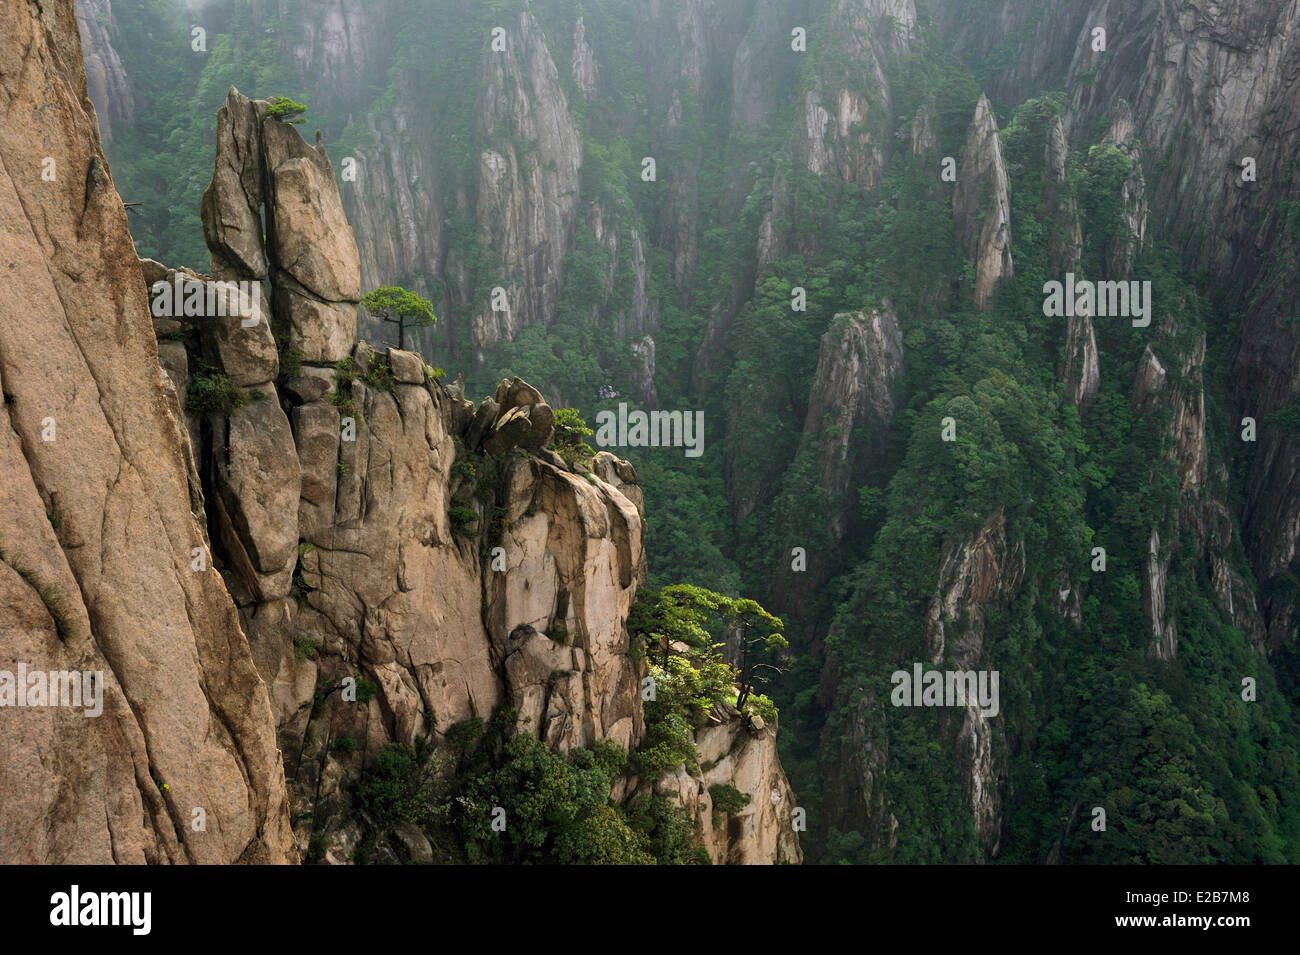 China, Anhui province, Huangshan mountain (Yellow mountains), listed as World Heritage by UNESCO Stock Photo